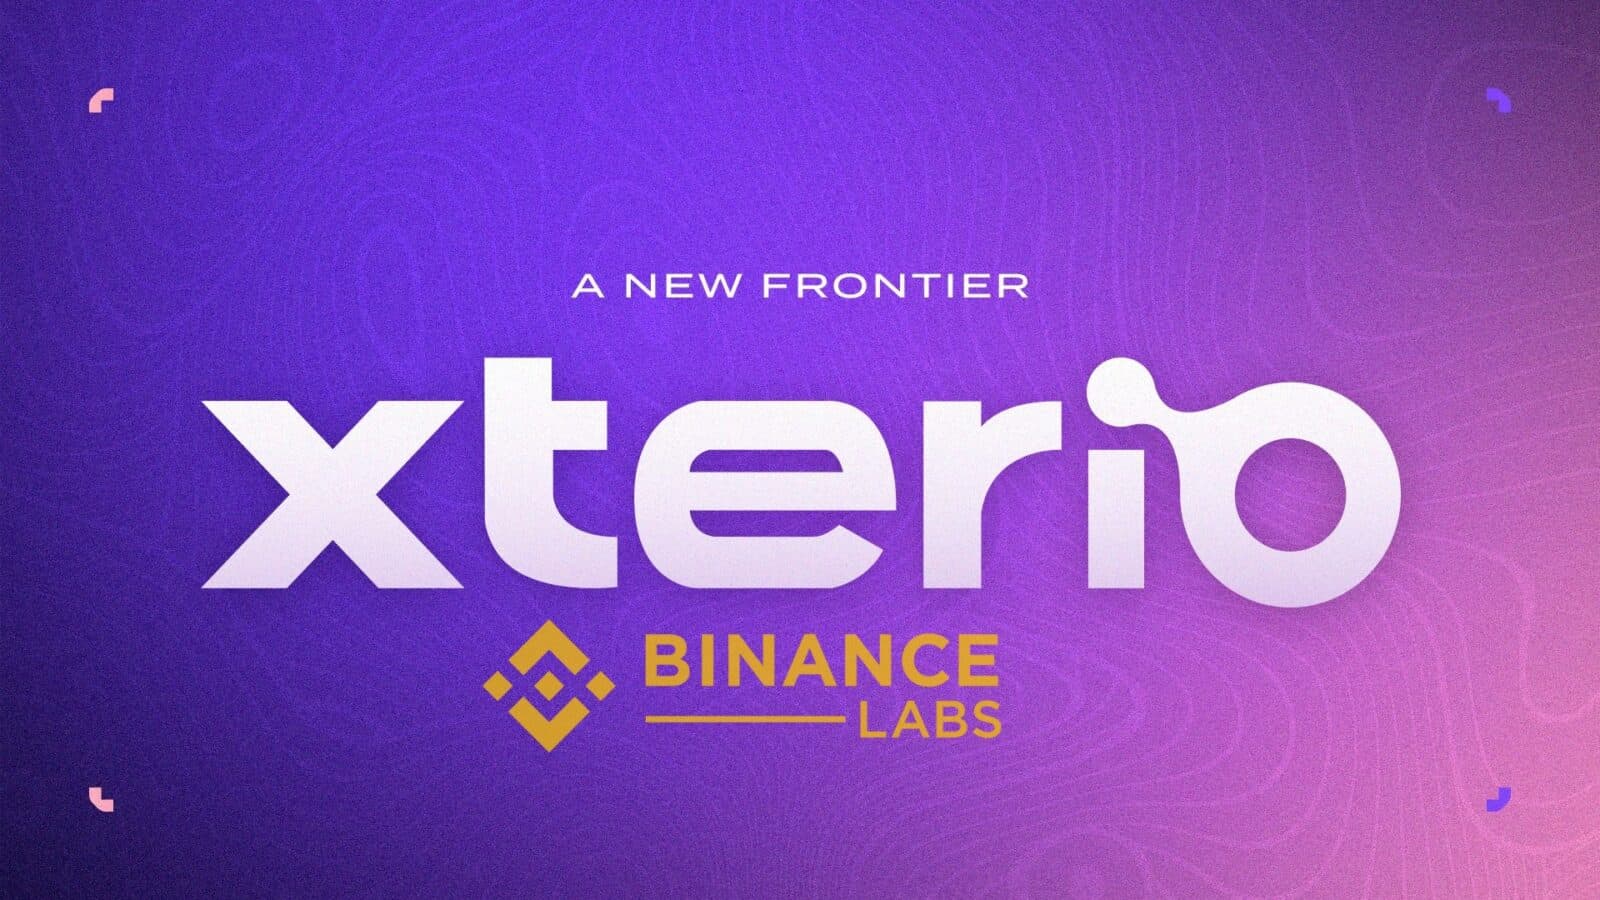 Binance Labs Invests 15M in Xterio to Boost AI and Web3 Gaming Capabilities In a recent announcement, Binance Labs, the venture capital and incubation division of Binance, confirmed an investment of  million into Xterio, a leading platform for Web3 gaming. Xterio will use the funding to enhance game development, particularly in the areas of artificial intelligence (AI) and Web3 technologies.